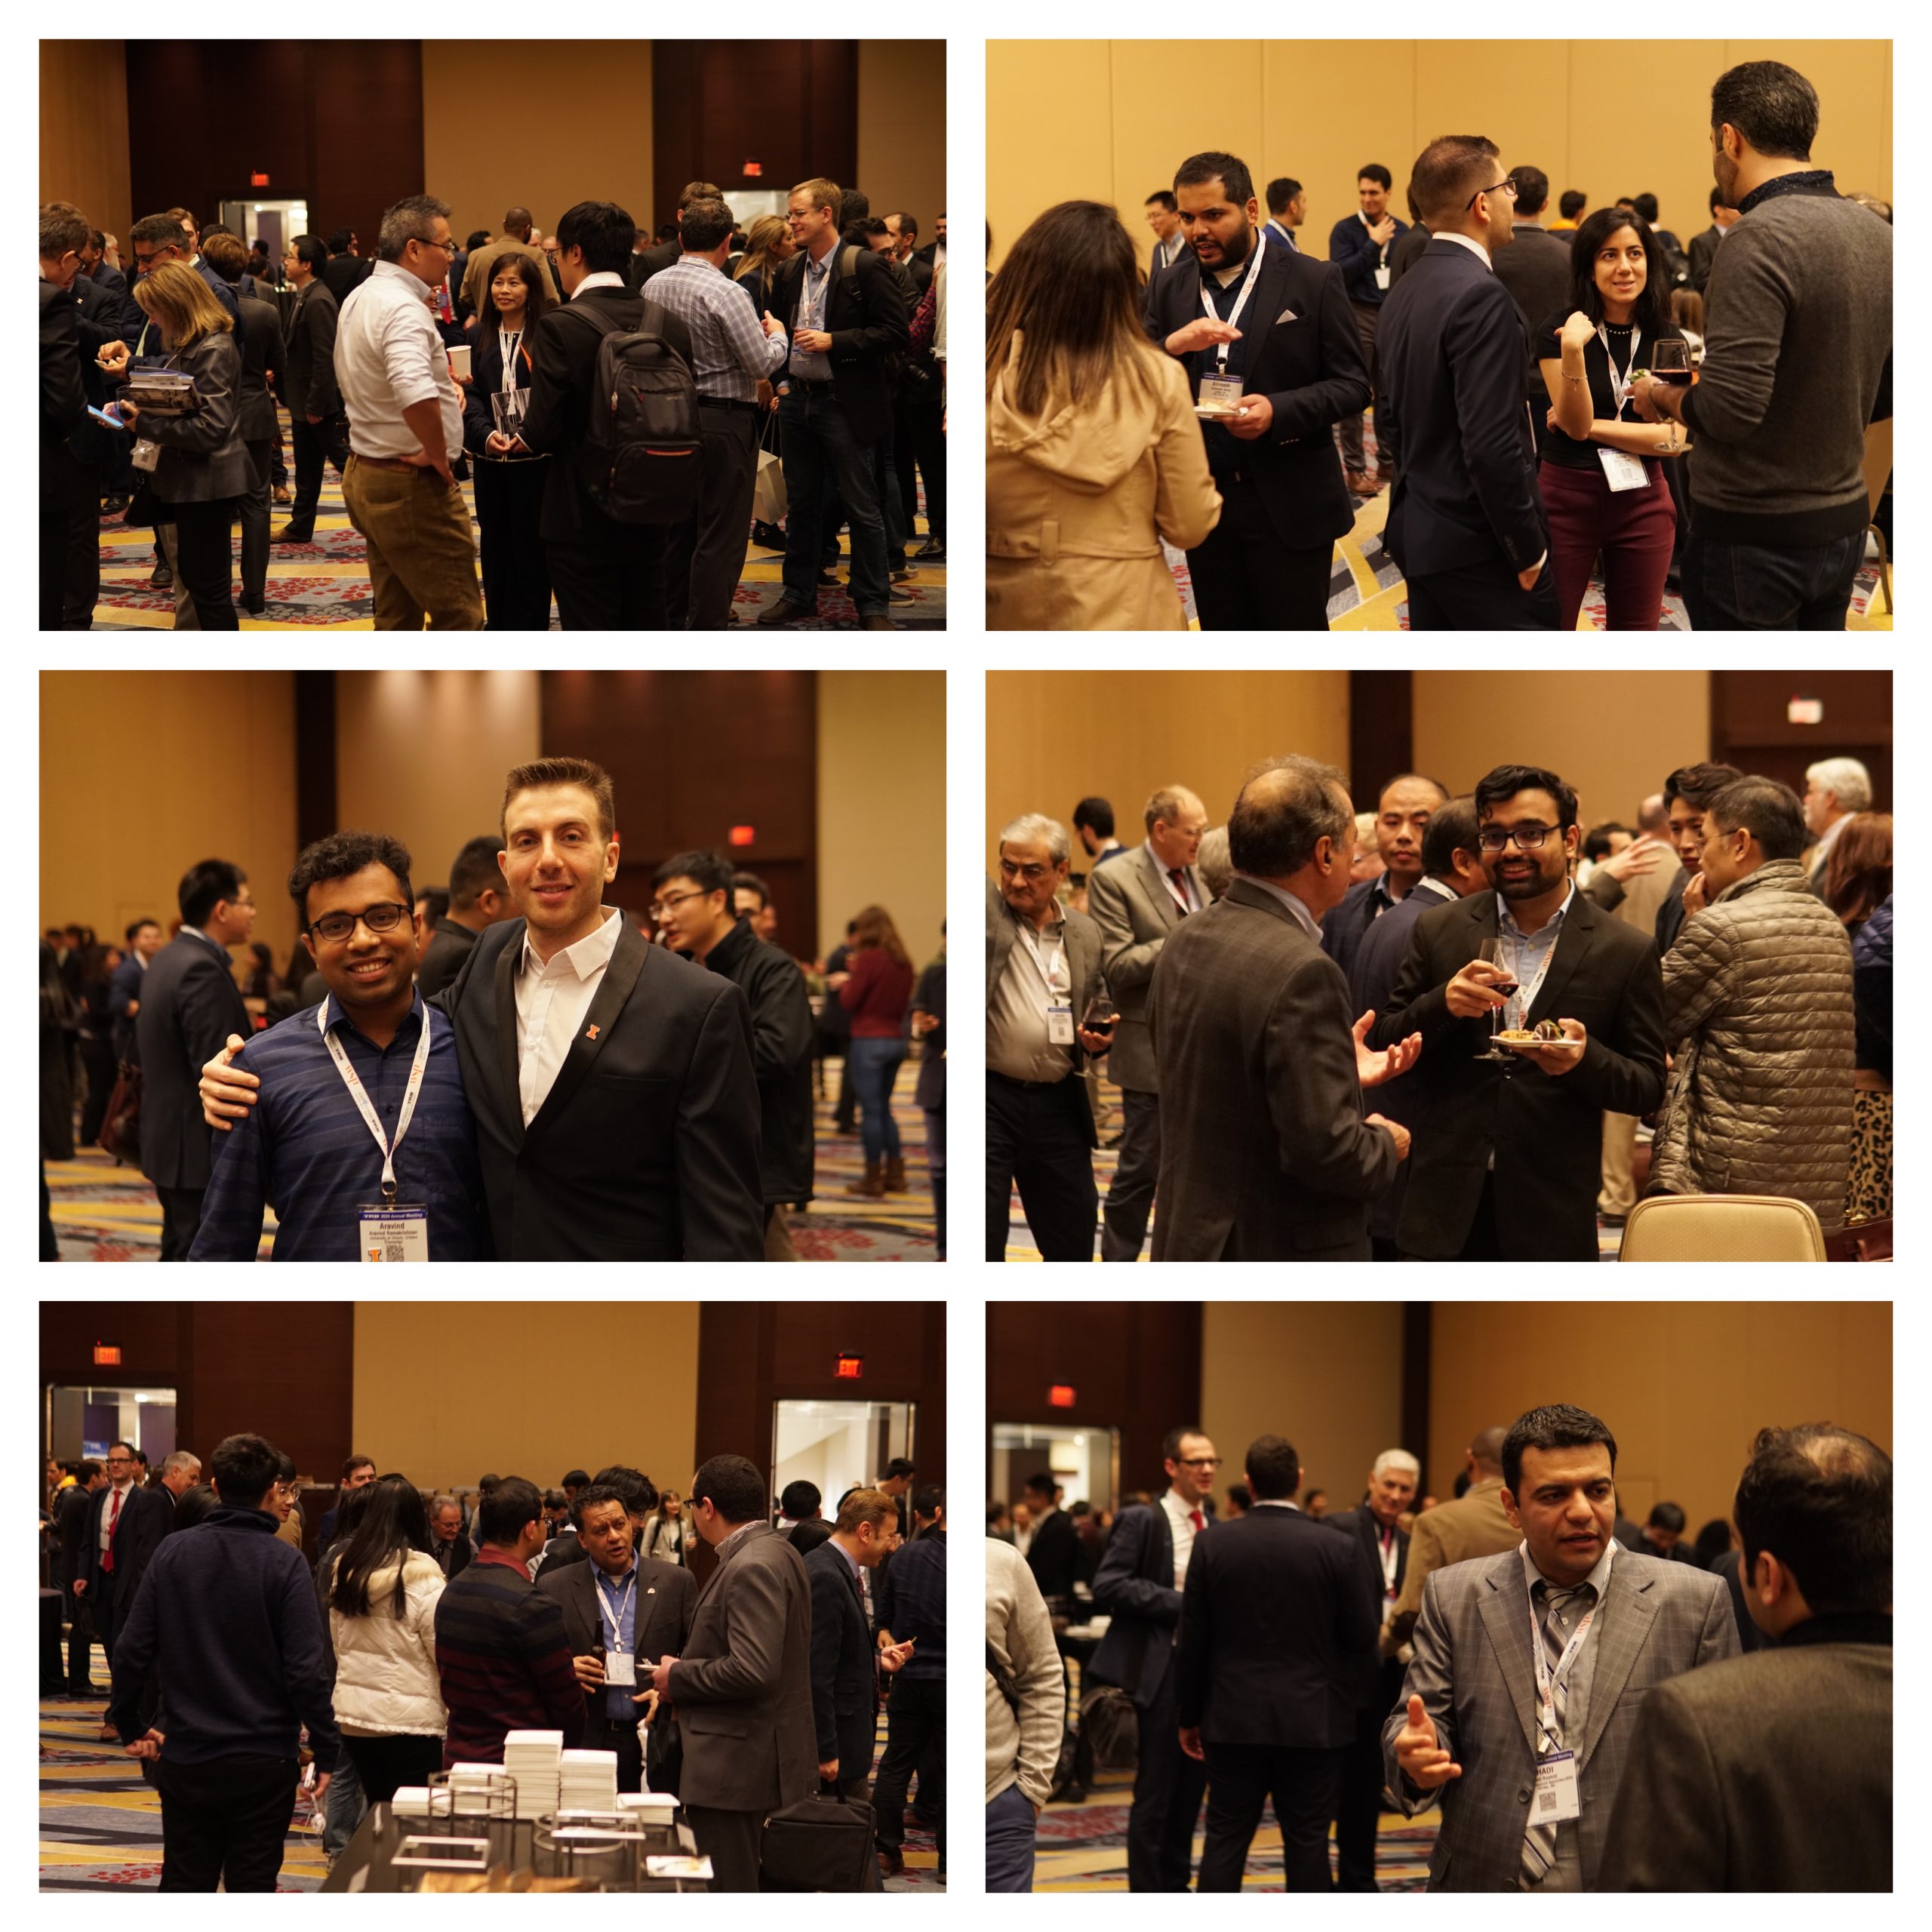 At the transportation reception, attendees had the opportunity to discuss the latest in transportation and network with future potential endeavors.